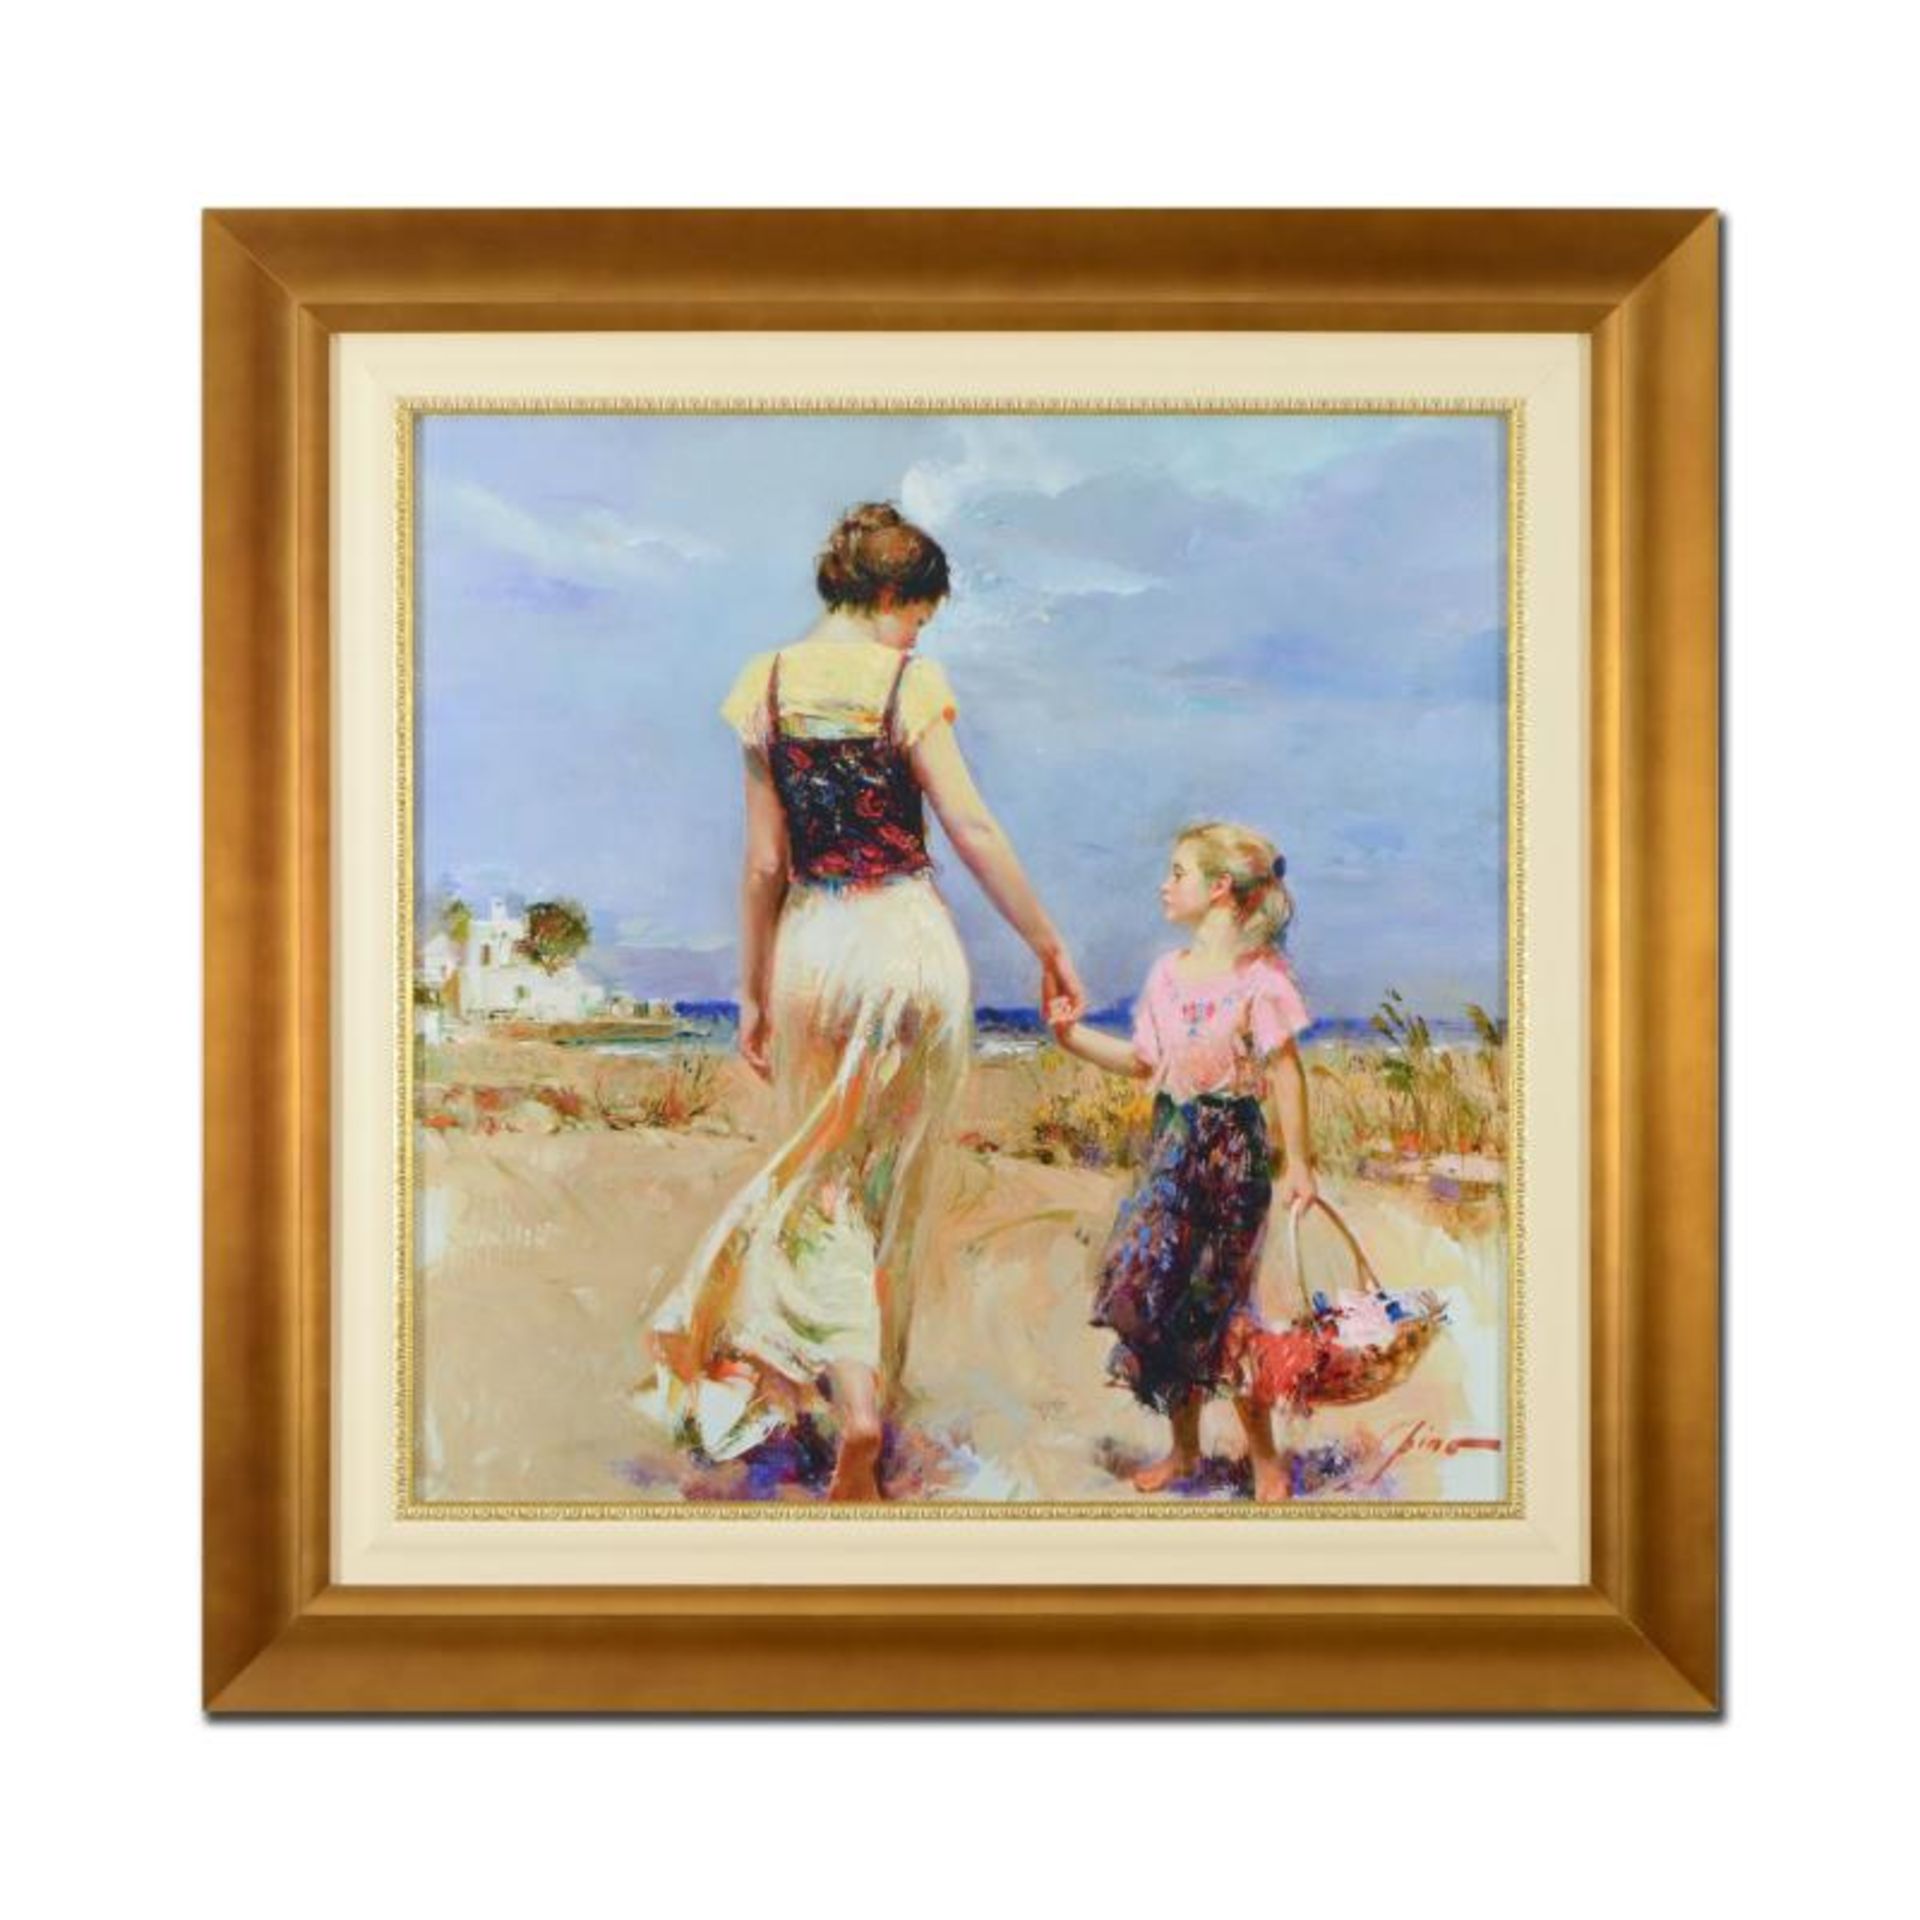 Pino (1939-2010), "Let's Go Home" Framed Limited Edition Artist-Embellished Gicl